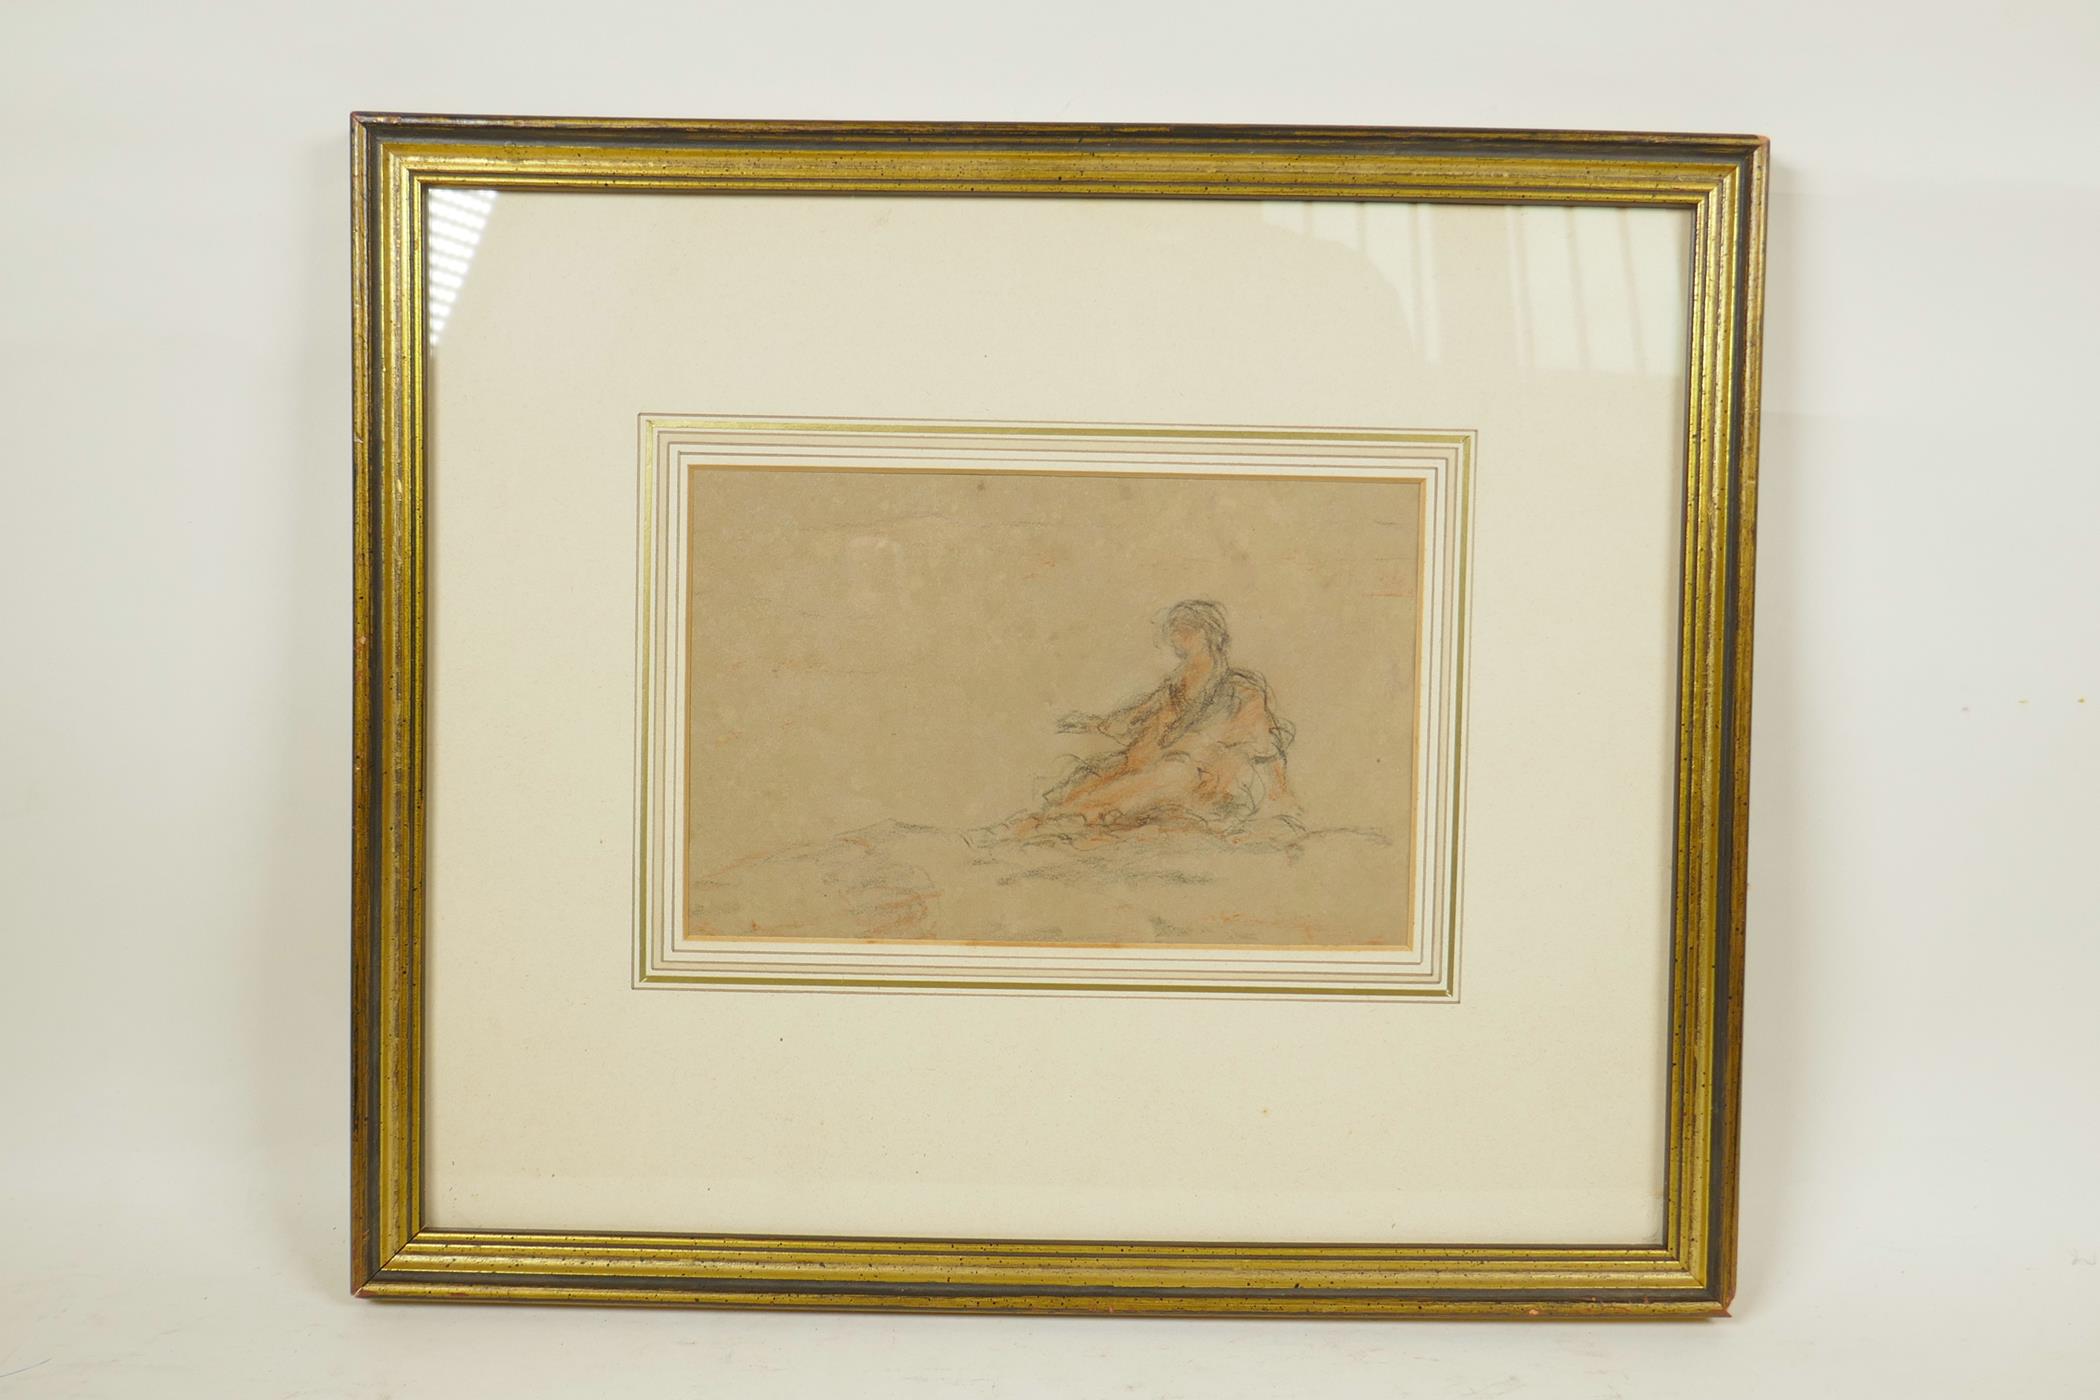 Study of a lady seated in a landscape, early C18th, charcoal drawing highlighted with red chalk, - Image 2 of 3